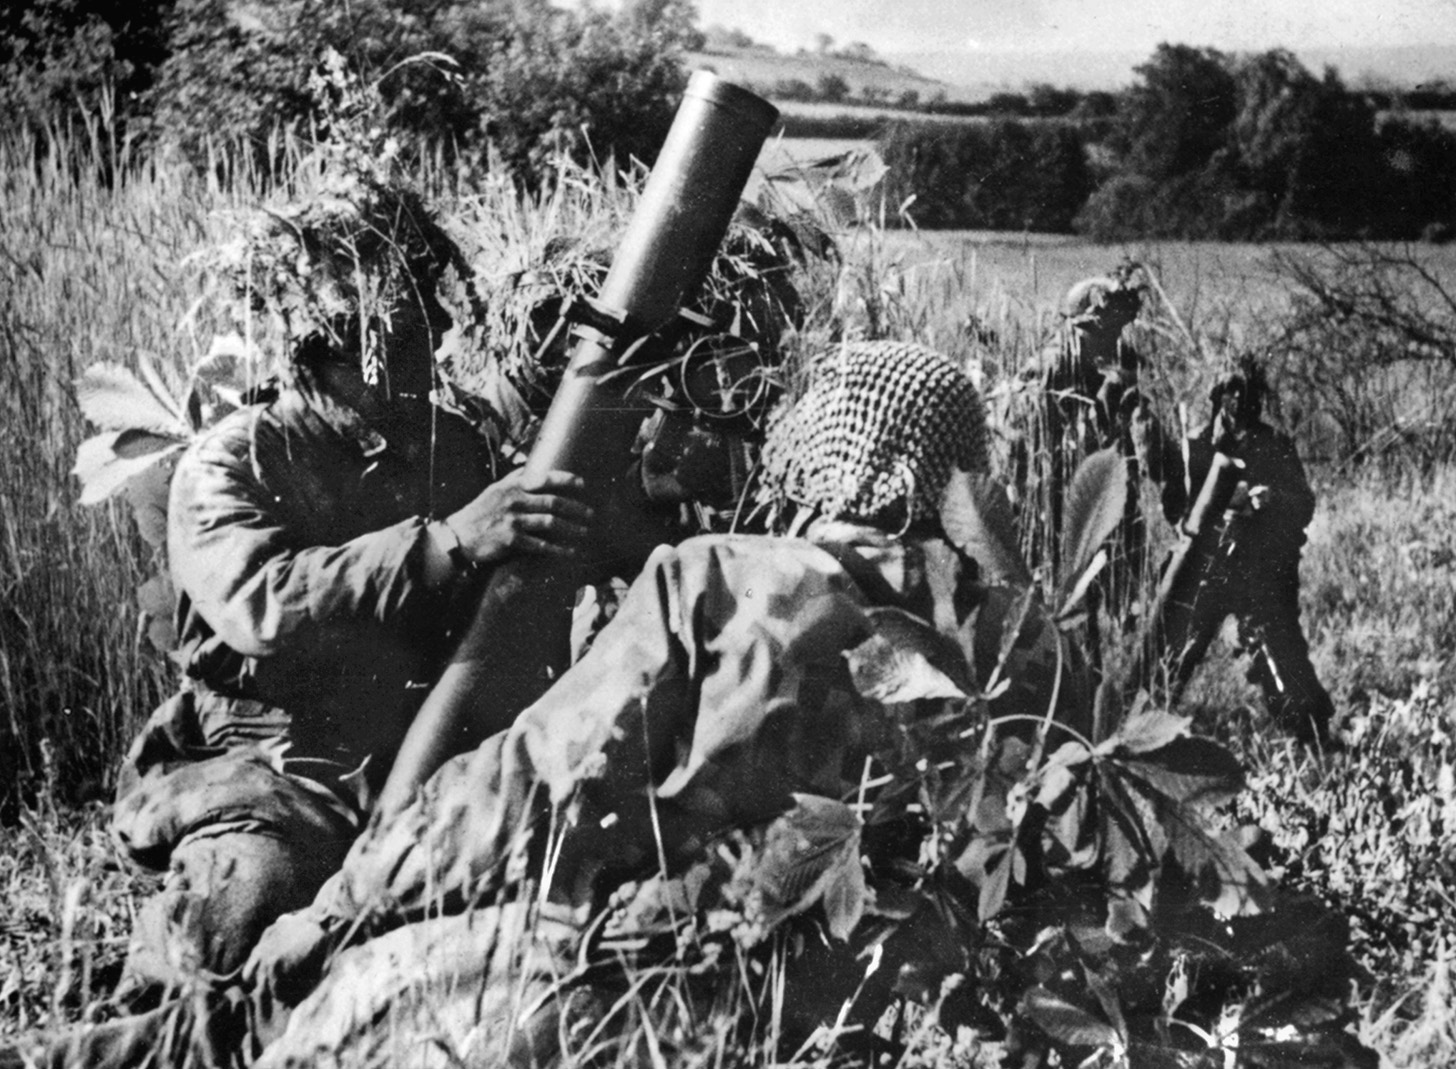 Fighting doggedly on the defensive in the hedgerow country of Normandy, German soldiers fire their 81mm mortars at advancing American troops. Note their heavily camouflaged helmets and uniforms. The Germans were ordered by Hitler to fight to the last man in defense of Cherbourg.